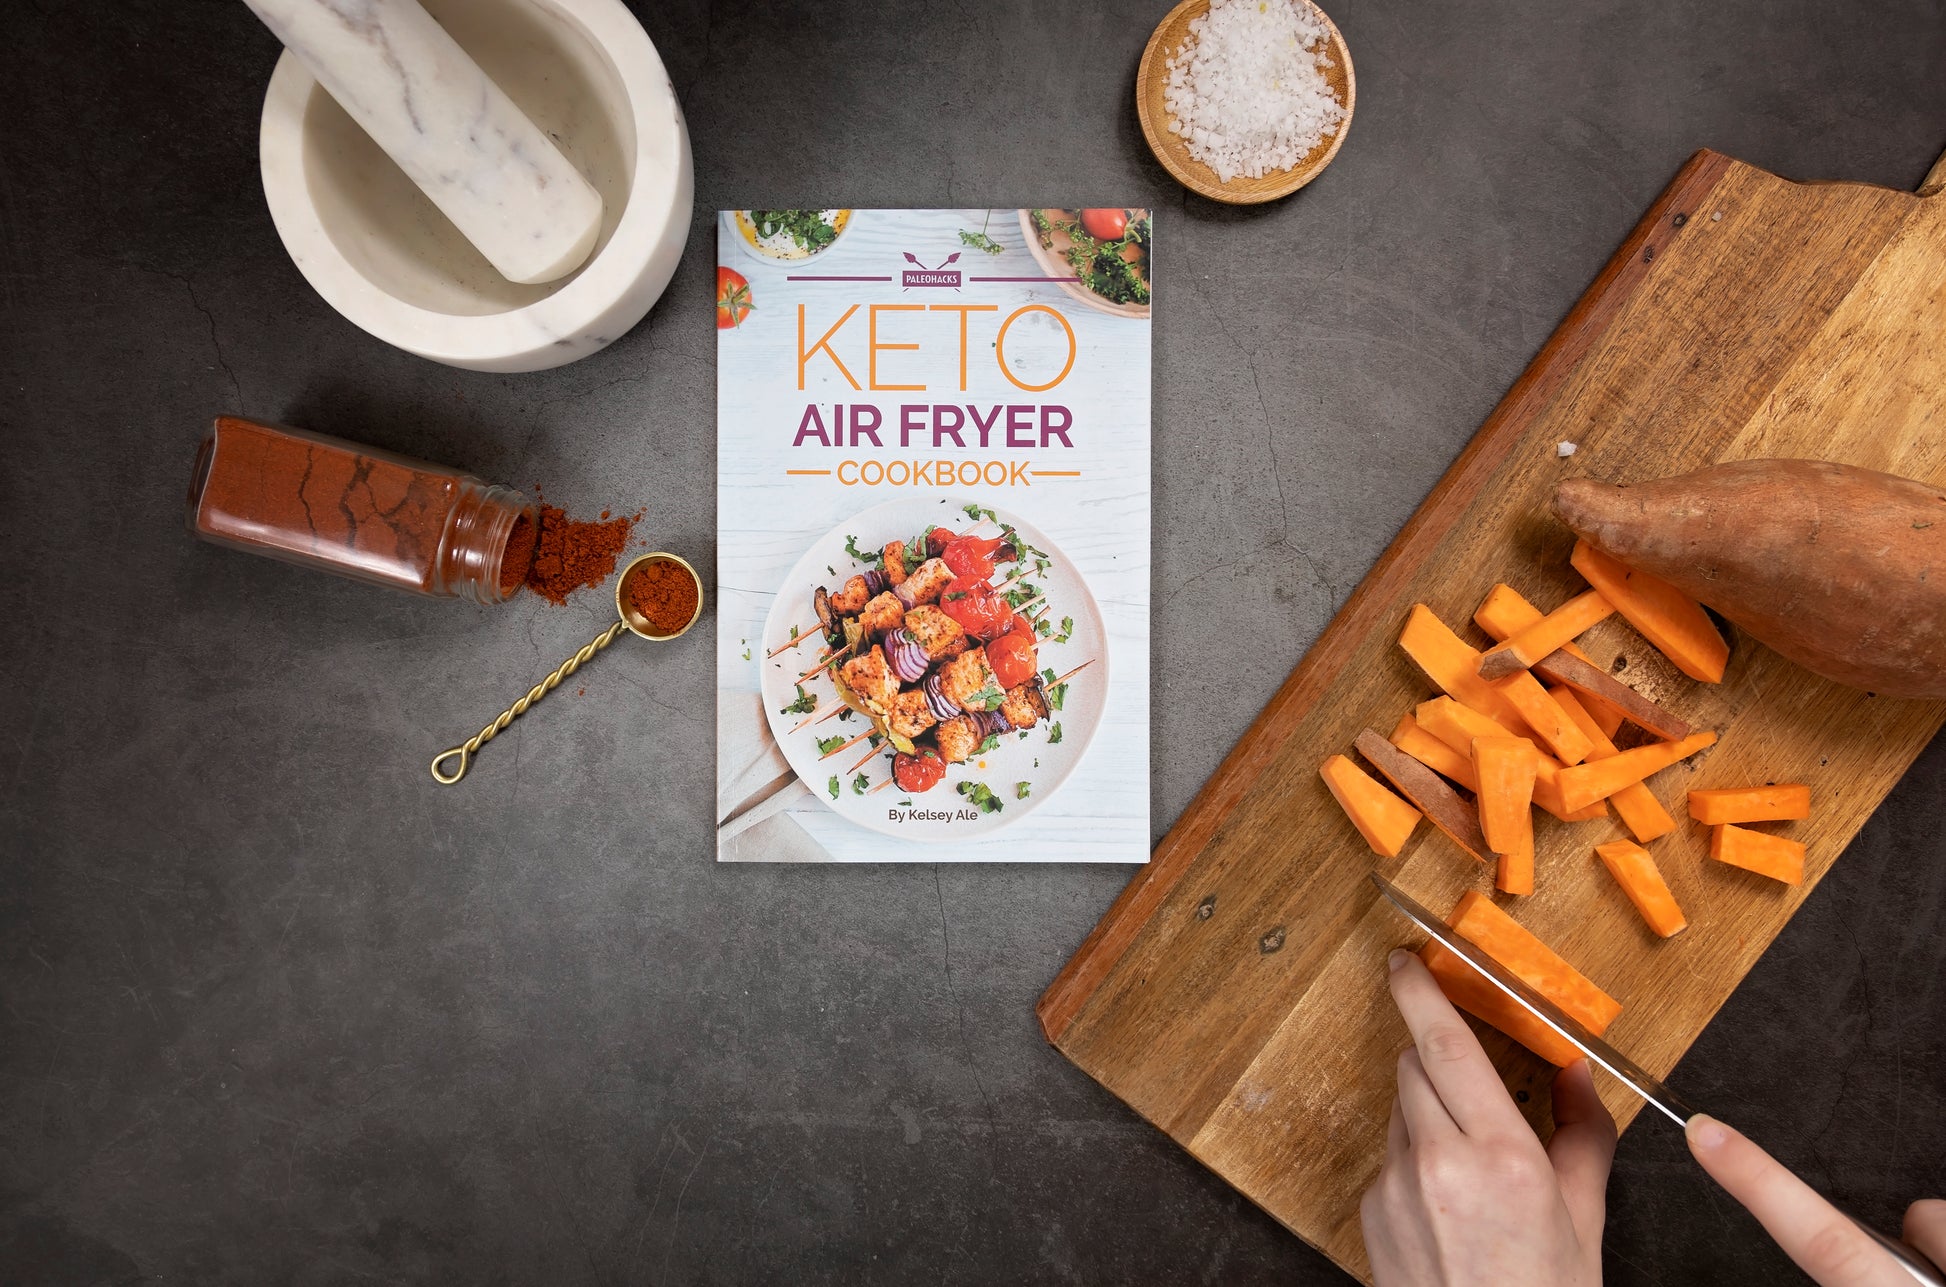 Keto air fryer cookbook surrounded by a wooden board with diced sweet potatoes, a bottle of spice, sea salt, and a kitchenware.